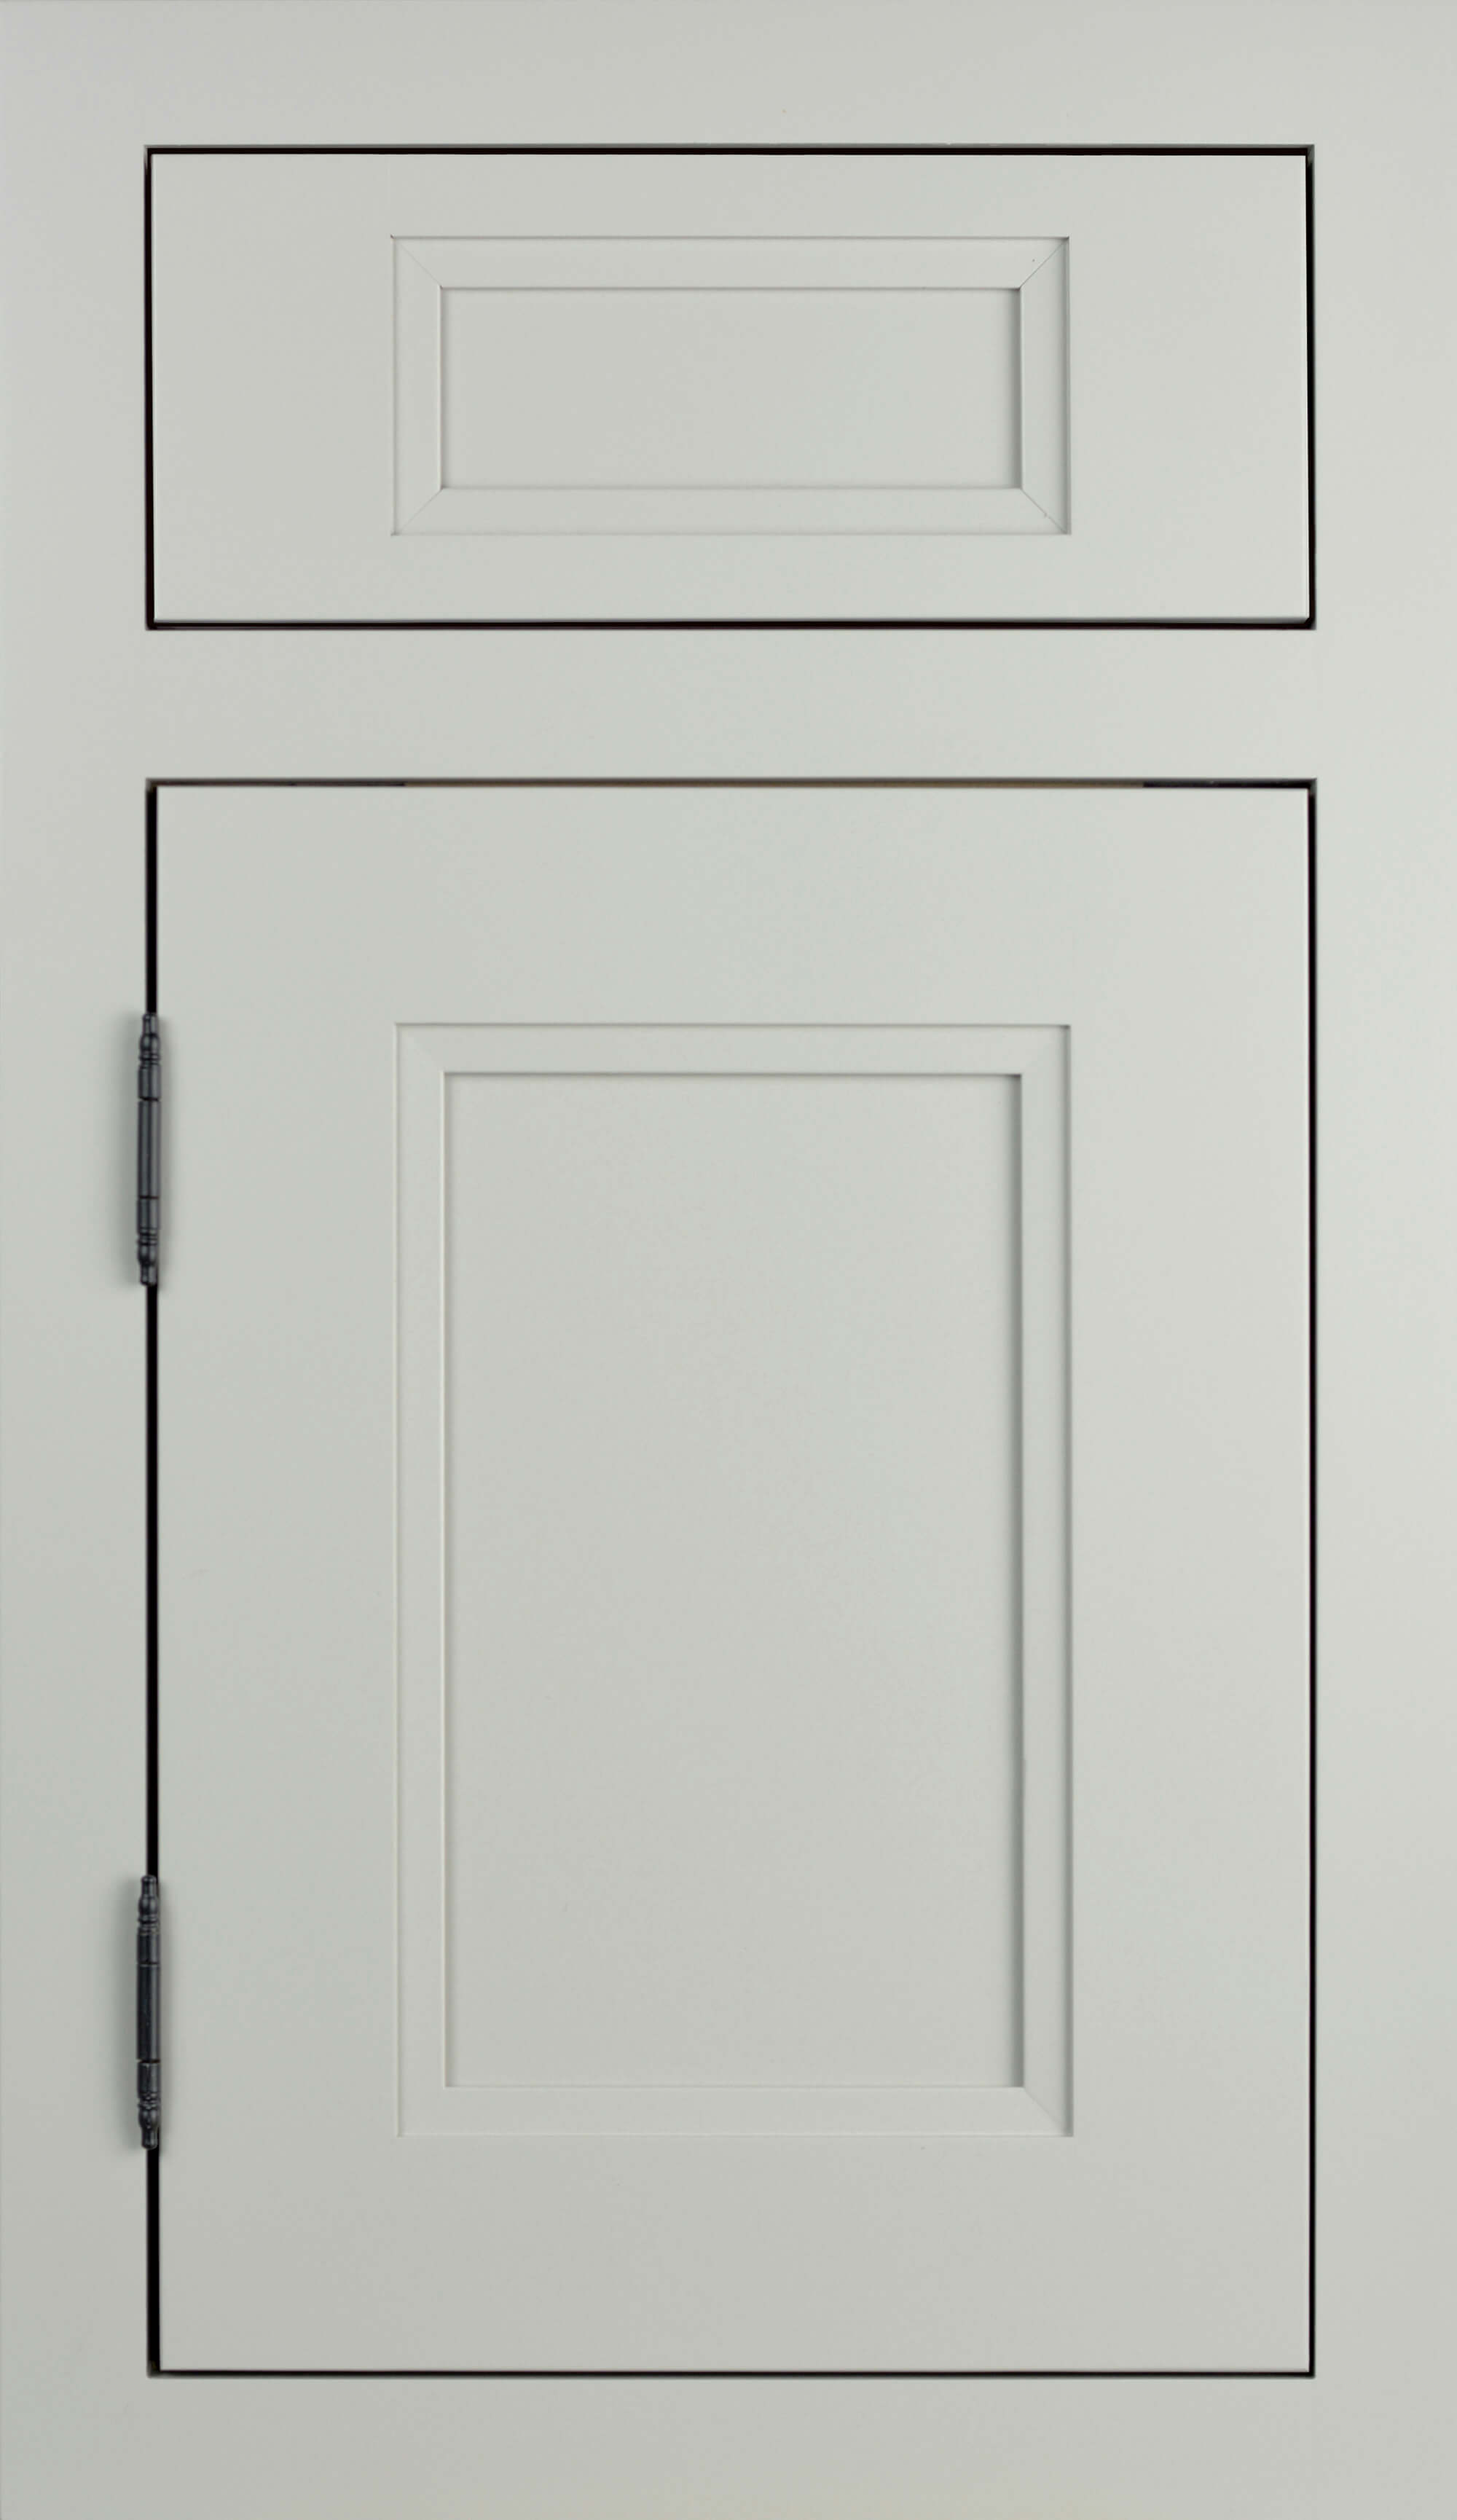 Dura Supreme Cabinetry, Inset Styling with Barrel Hinging on the Dempsey-Inset door style